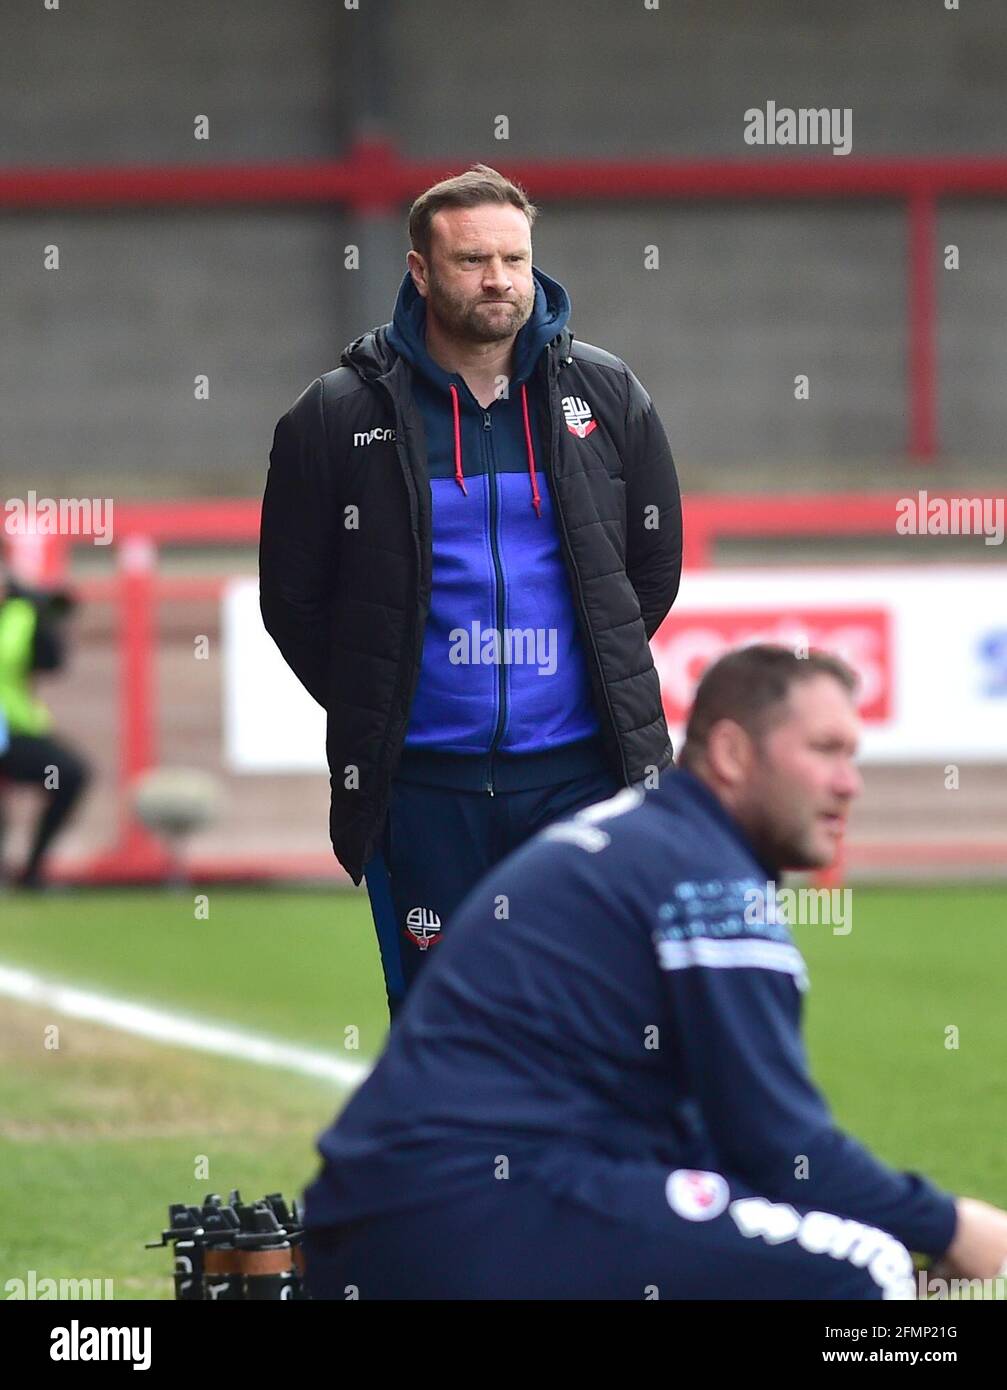 Bolton manager Ian Evatt during the Sky Bet League Two match between Crawley Town and Bolton Wanderers at the People's Pension Stadium  , Crawley ,  UK - 8th May 2021 -  EDITORIAL USE ONLY No use with unauthorised audio, video, data, fixture lists, club/league logos or “live” services. Online in-match use limited to 120 images, no video emulation. No use in betting, games or single club/league/player publications Stock Photo